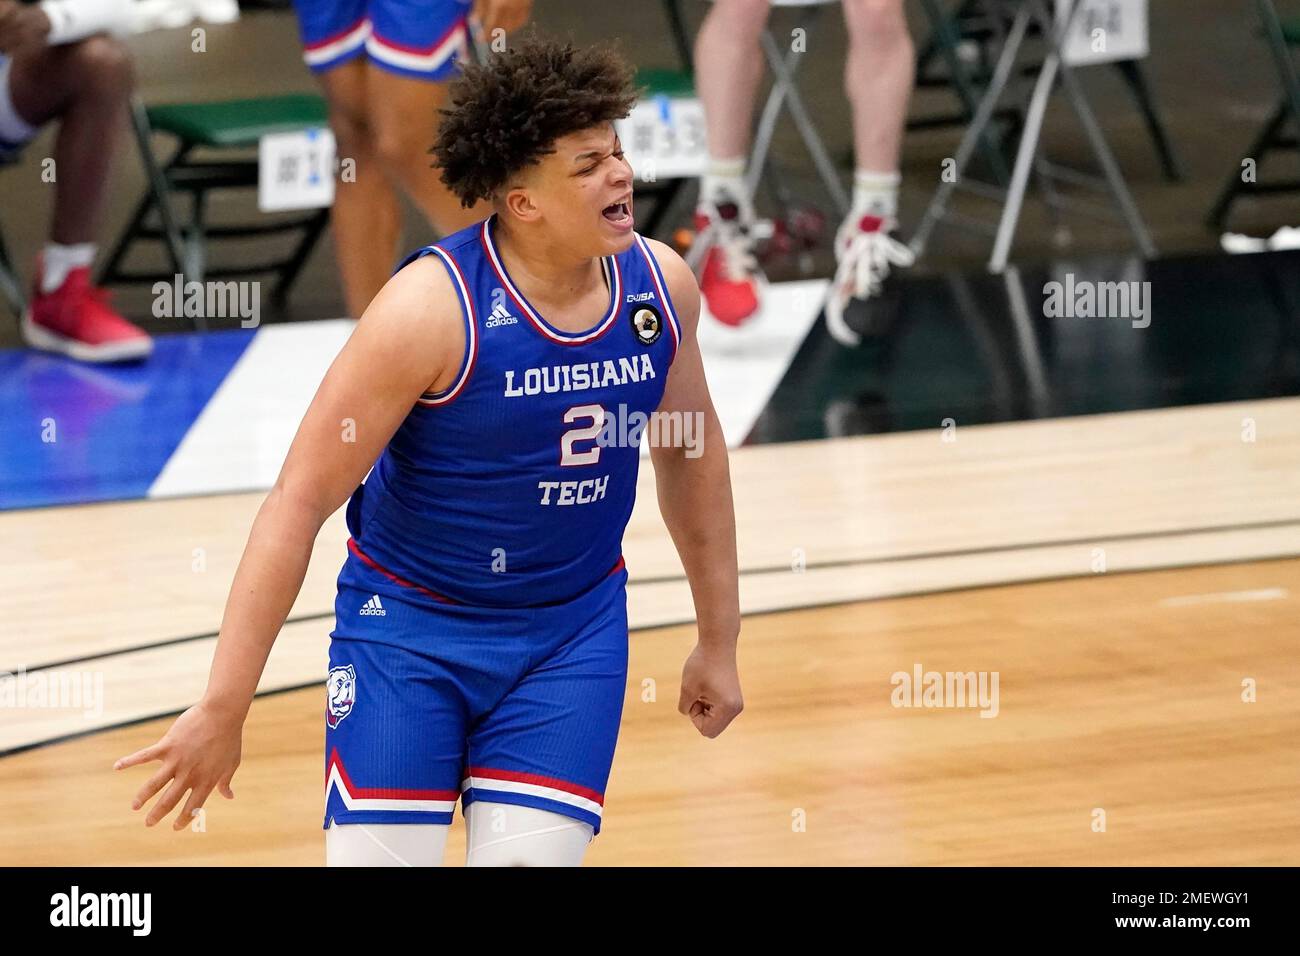 Louisiana Tech's Kenneth Lofton Jr. celebrates sinking a basket with  seconds left in the second half of an NCAA college basketball game against  Colorado State in the NIT, Sunday, March 28, 2021